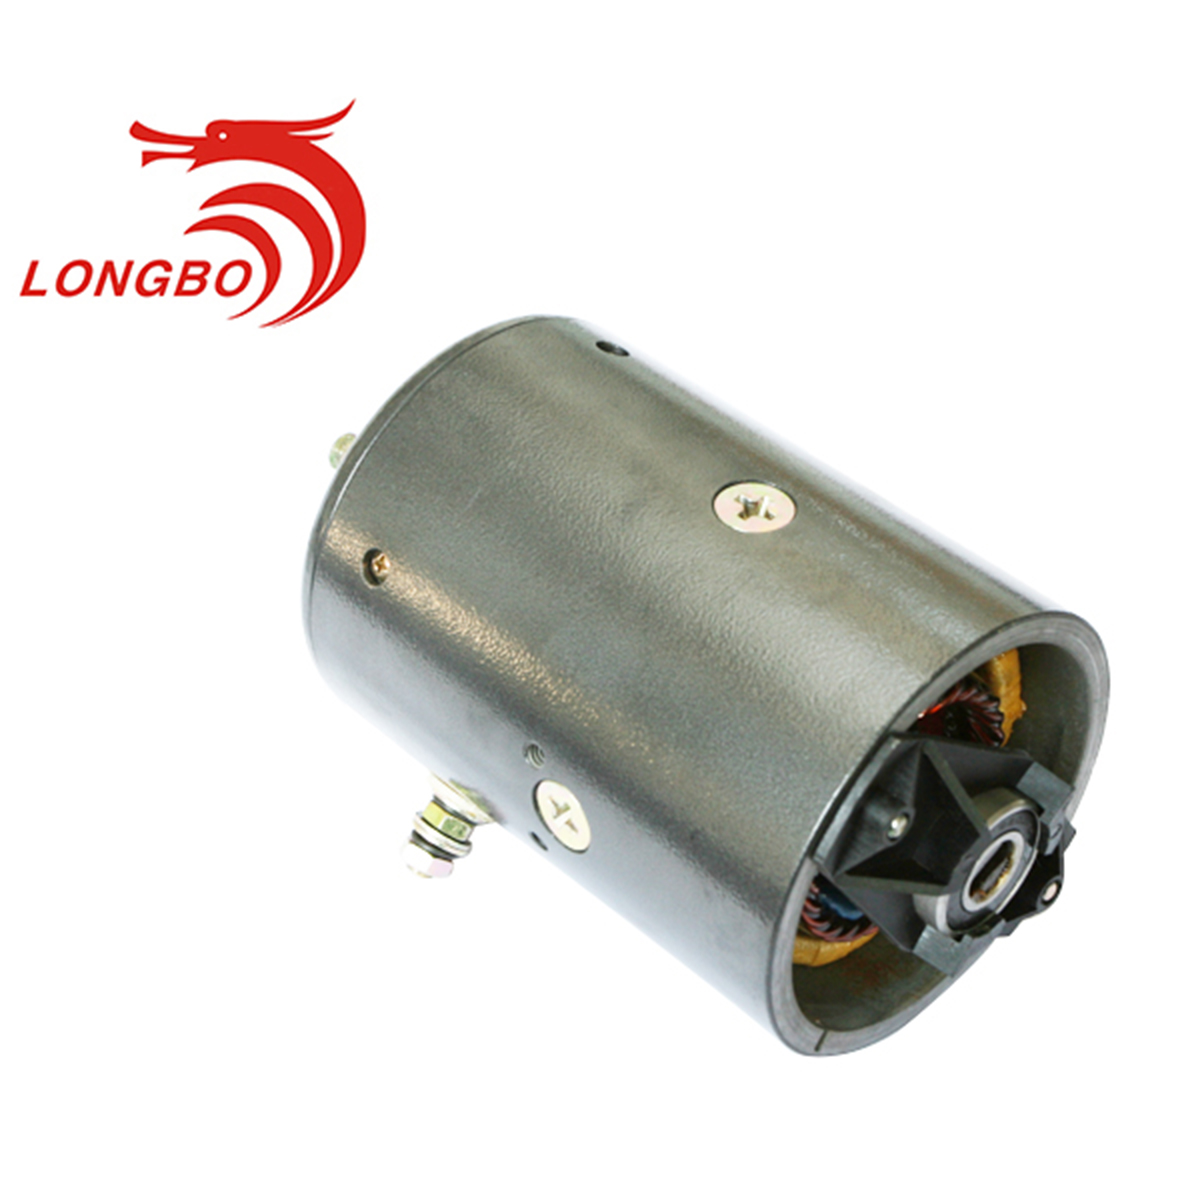 12V 1.6KW Series Wound double ball bearing DC Motor W-9993D HY61048